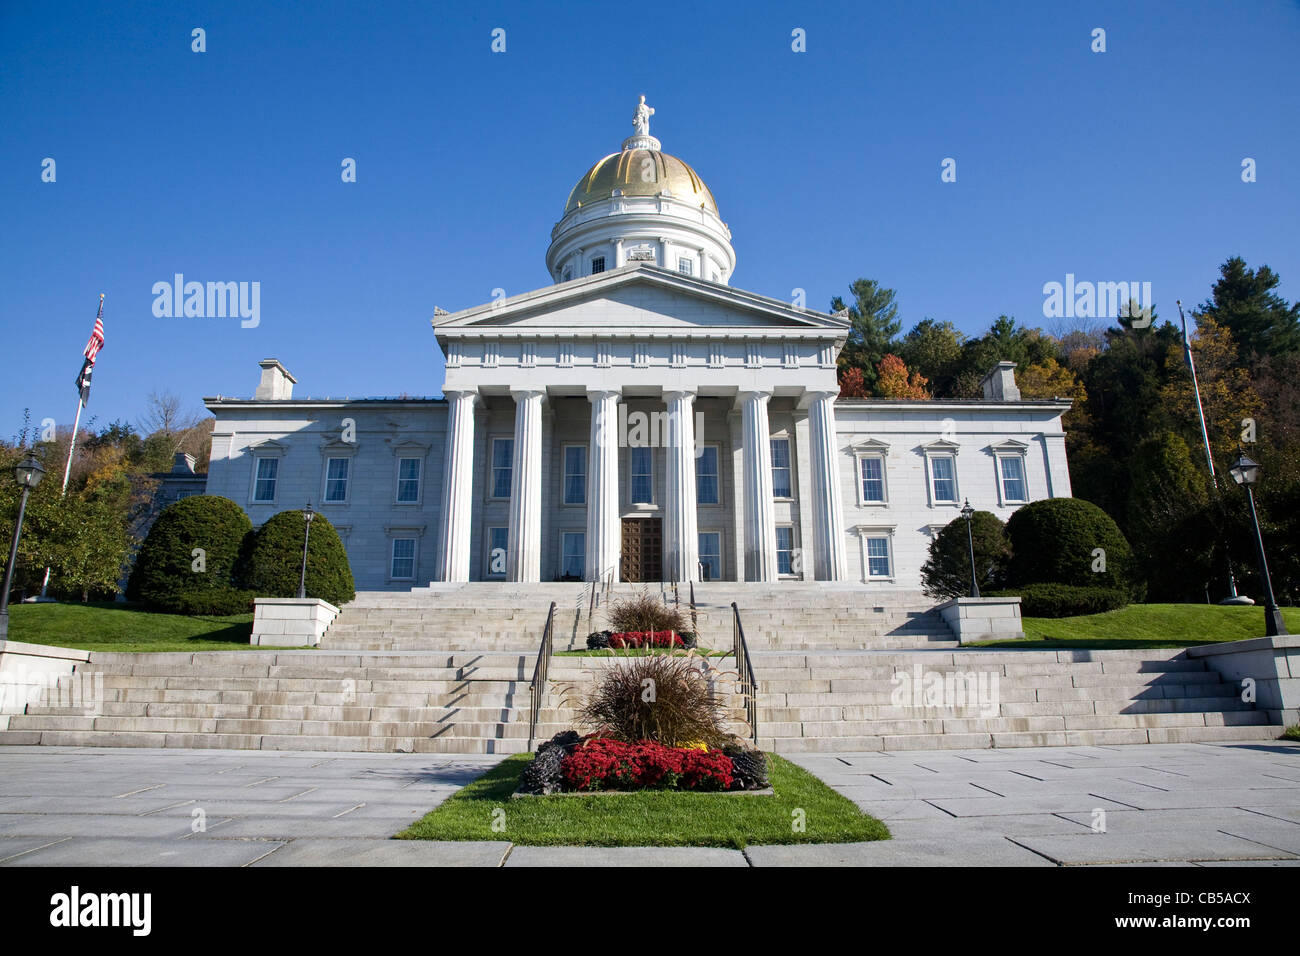 The State Capitol building in Montpelier, Vermont. Stock Photo